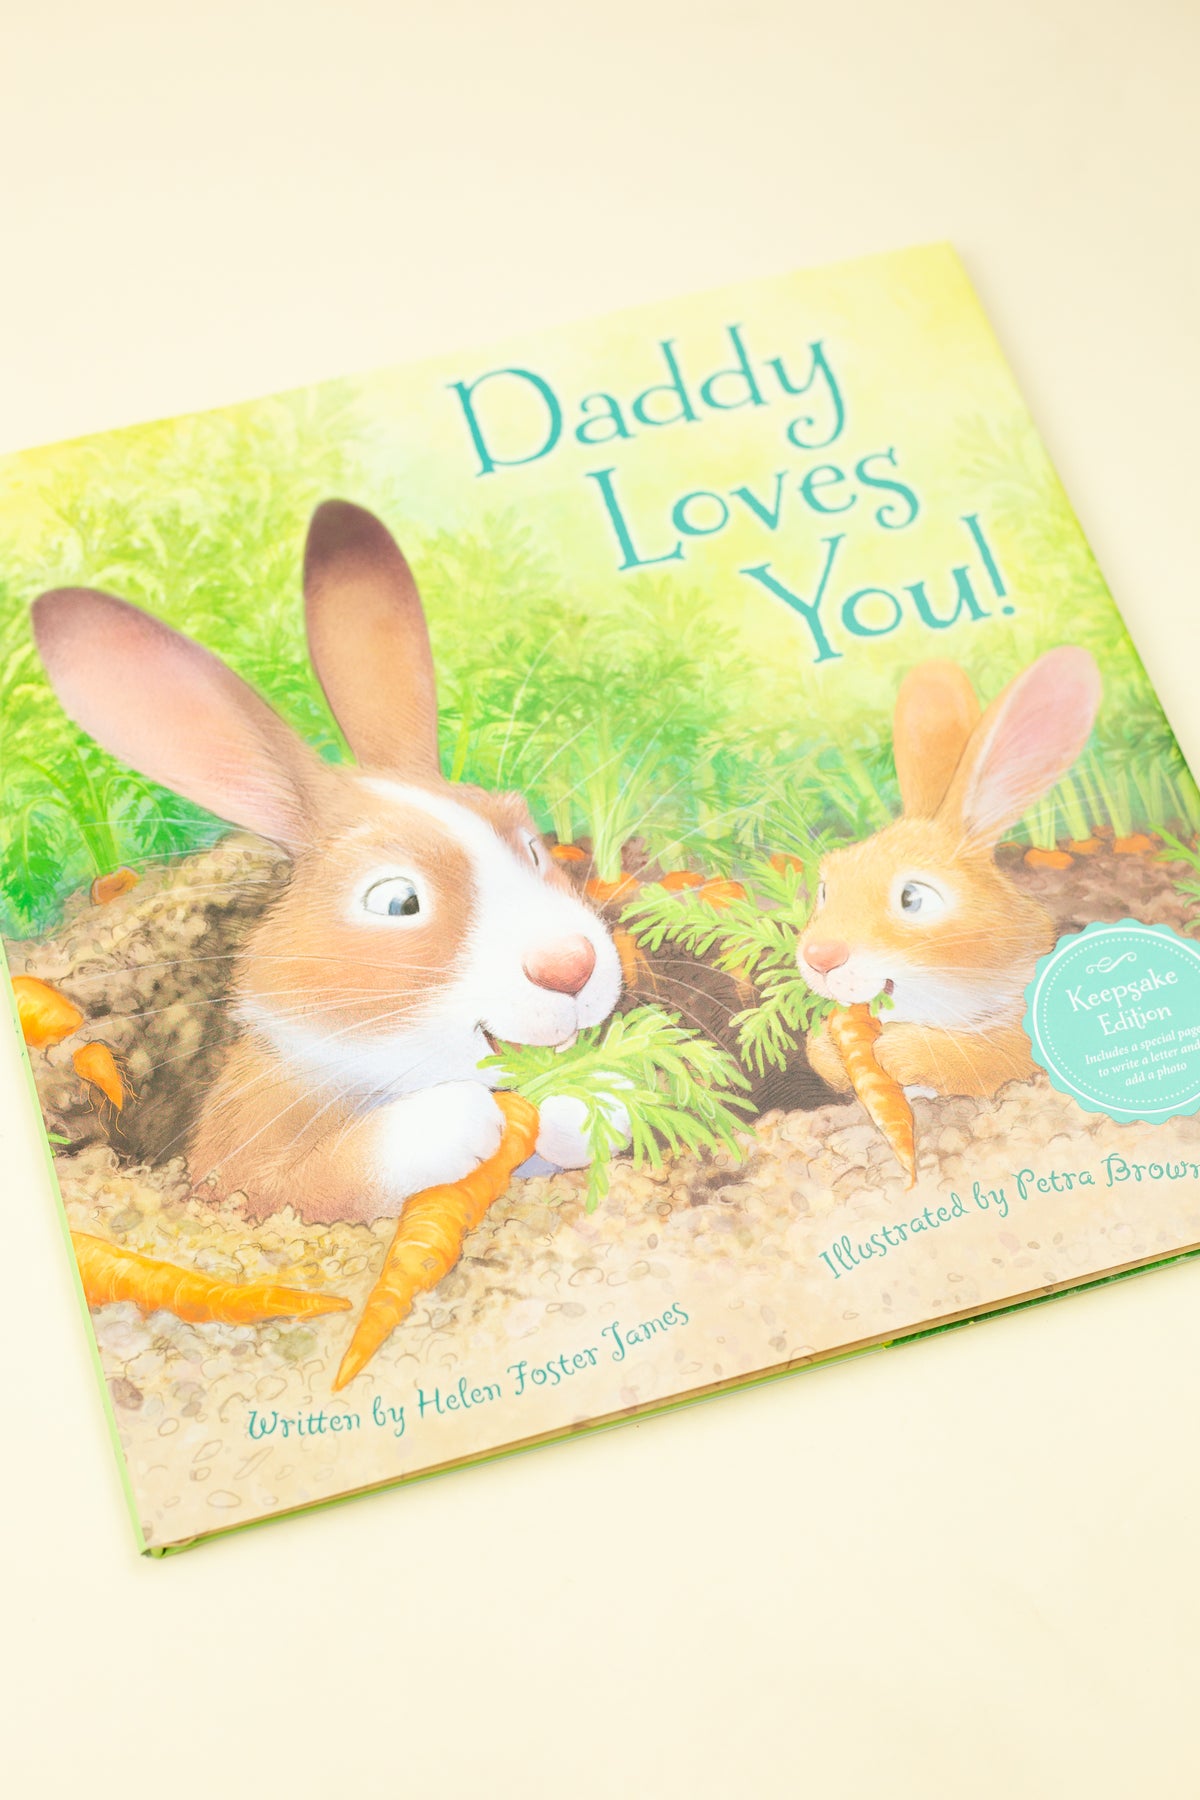 Daddy Loves You Picture Book